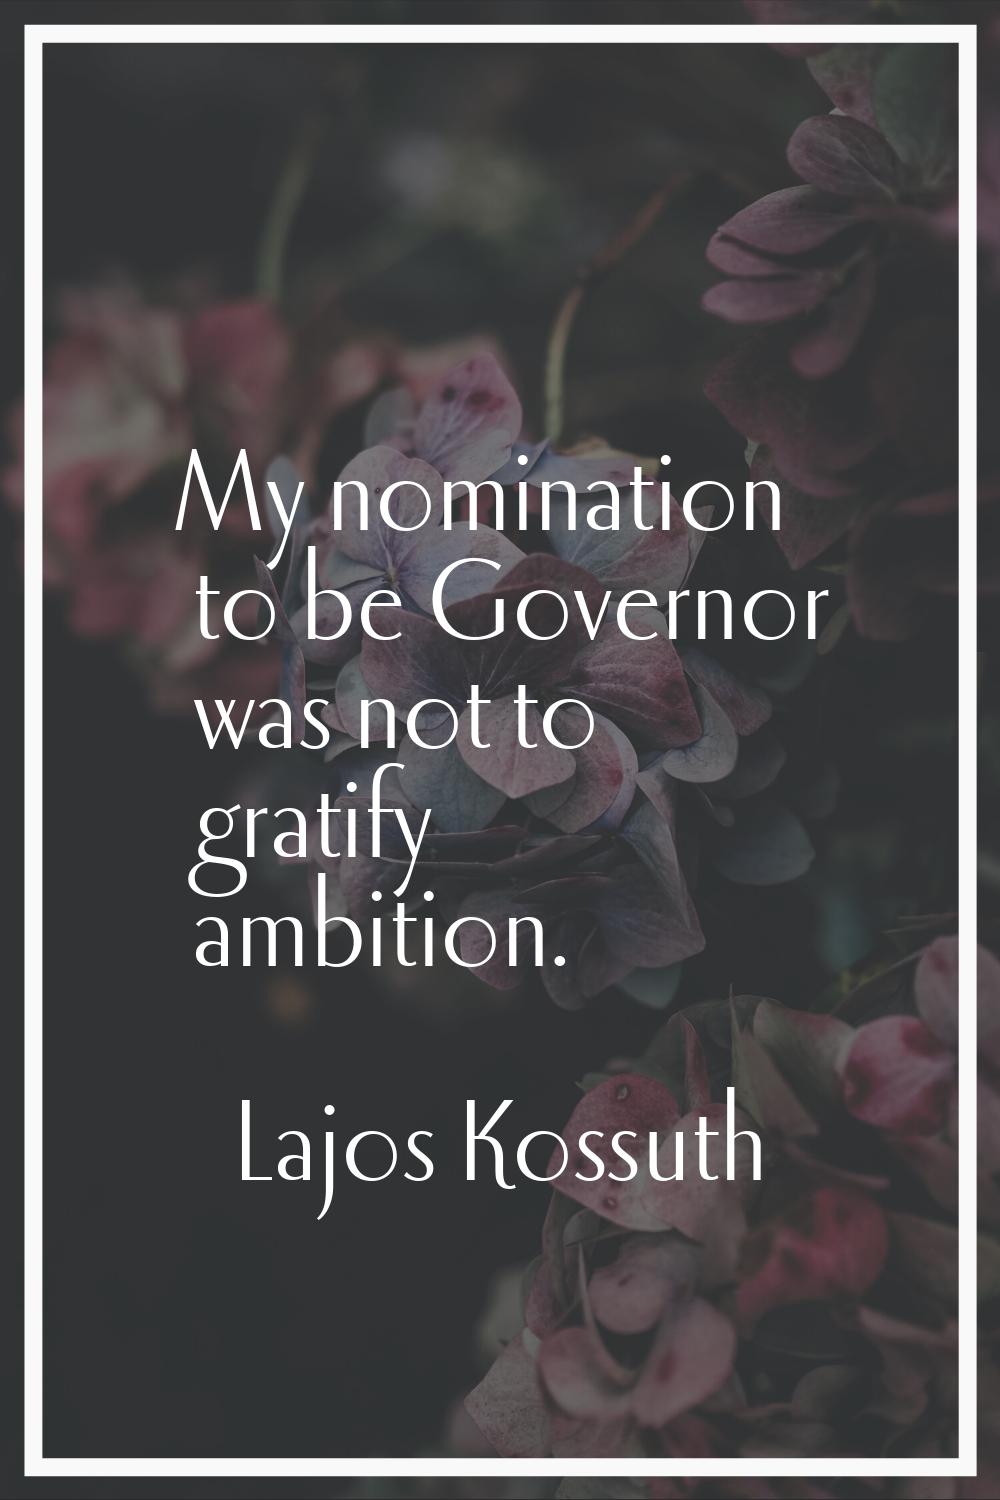 My nomination to be Governor was not to gratify ambition.